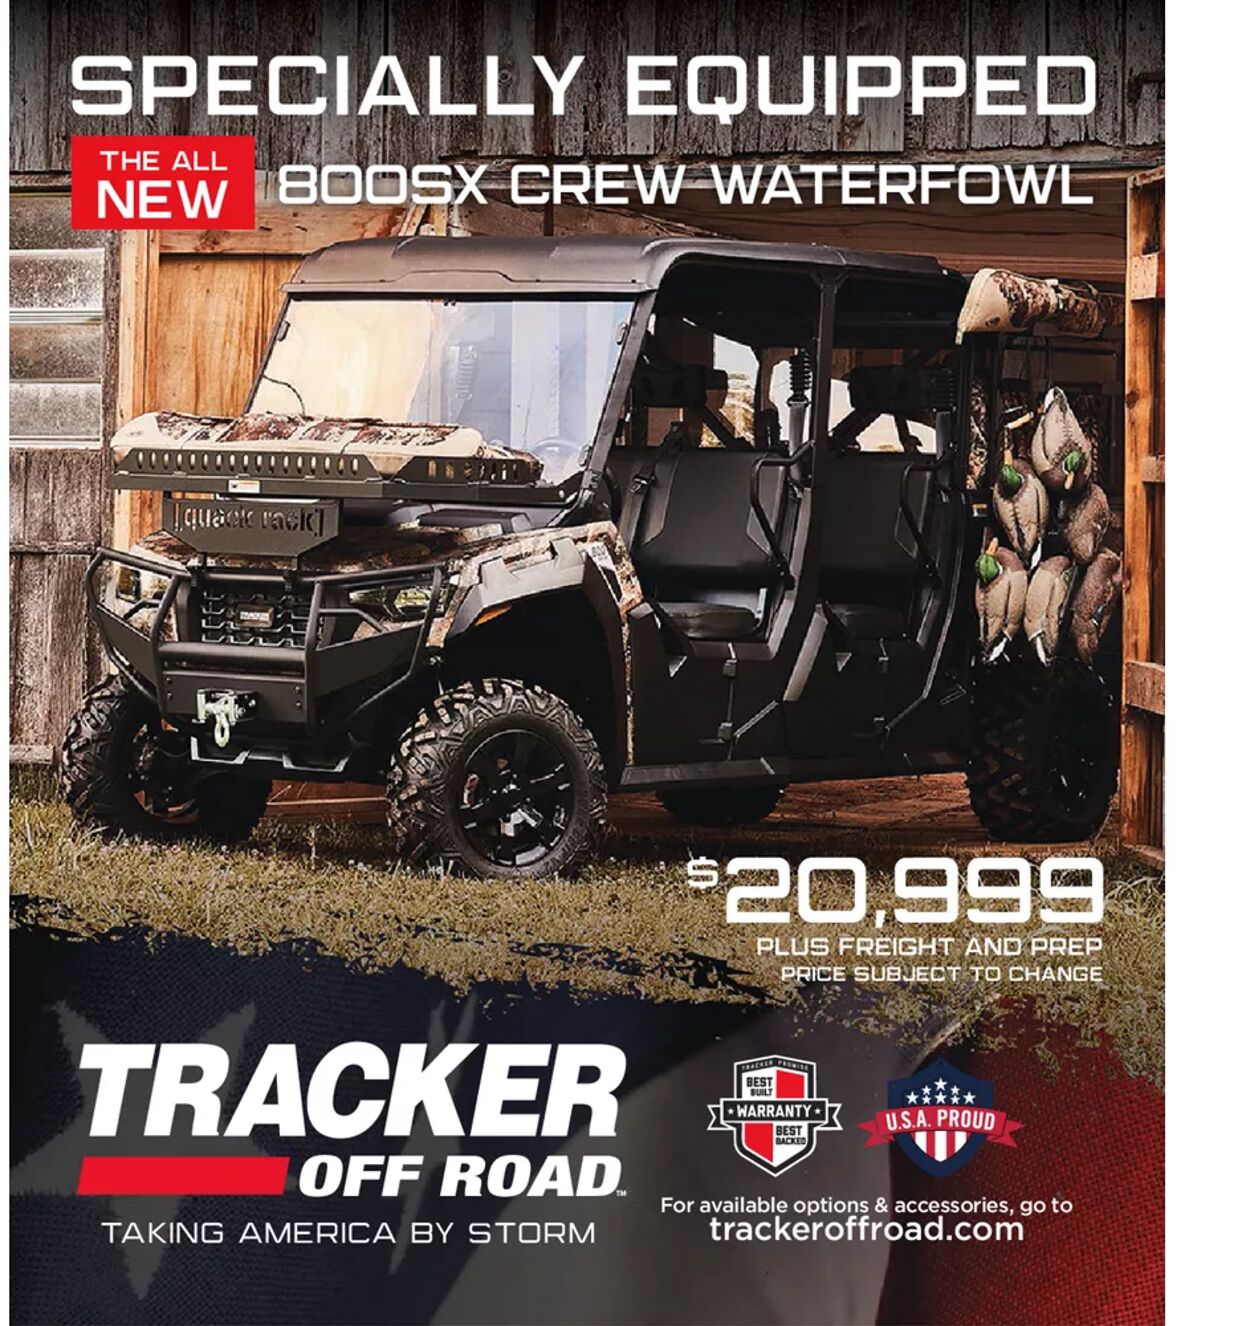 Weekly ad Cabela's 09/01/2022 - 12/31/2022